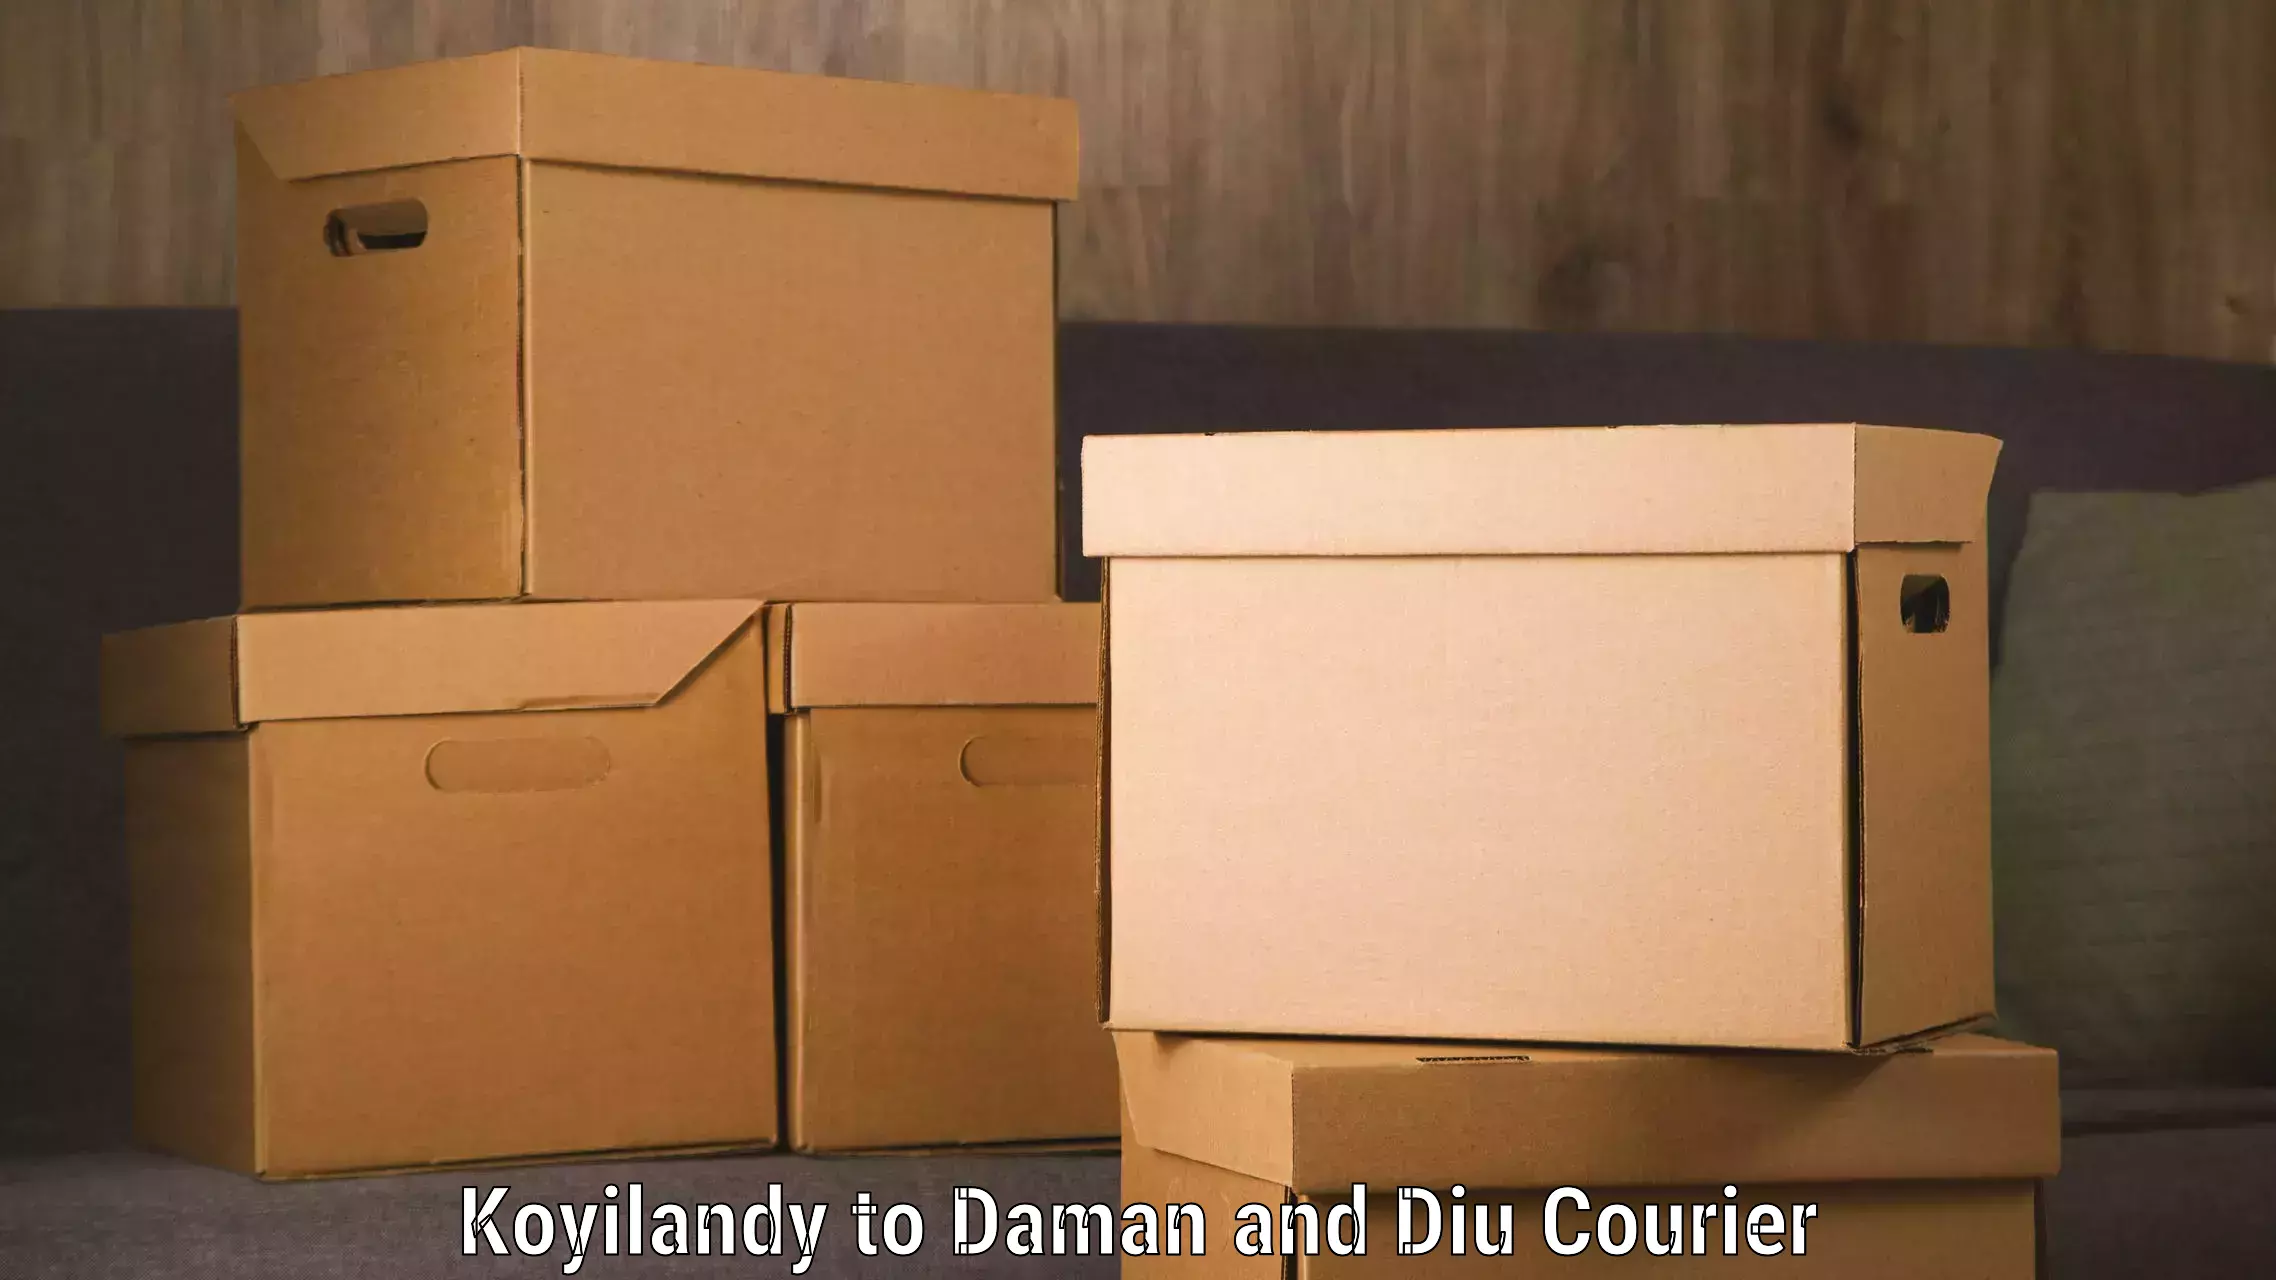 Package delivery network Koyilandy to Diu